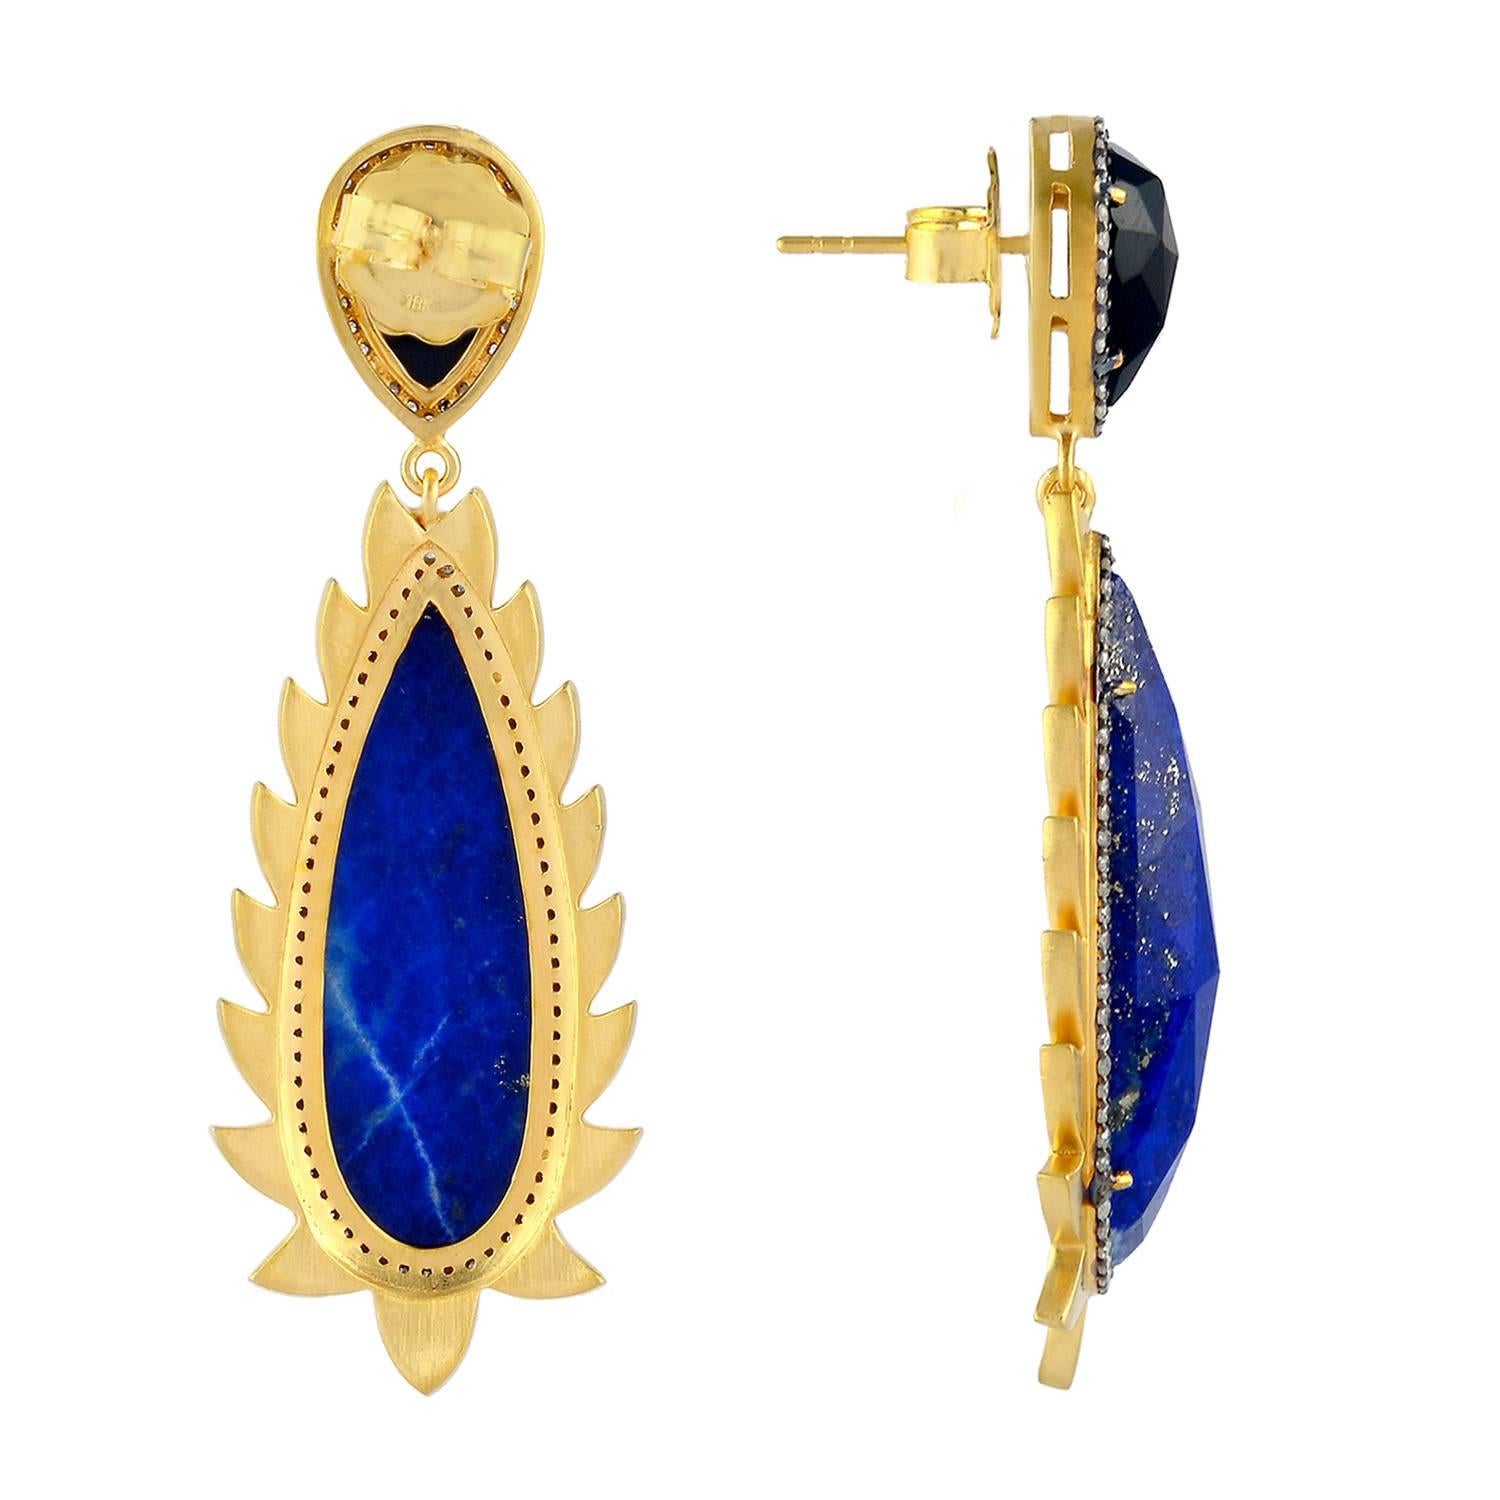 These modern and fiercely gorgeous drop earrings are handcrafted in 14K gold, sterling silver, 33.0 carat Lapis, 6.20 carat Black Onyx and 1.32 carat of sparkling diamonds . Exquisitely framed in signature 